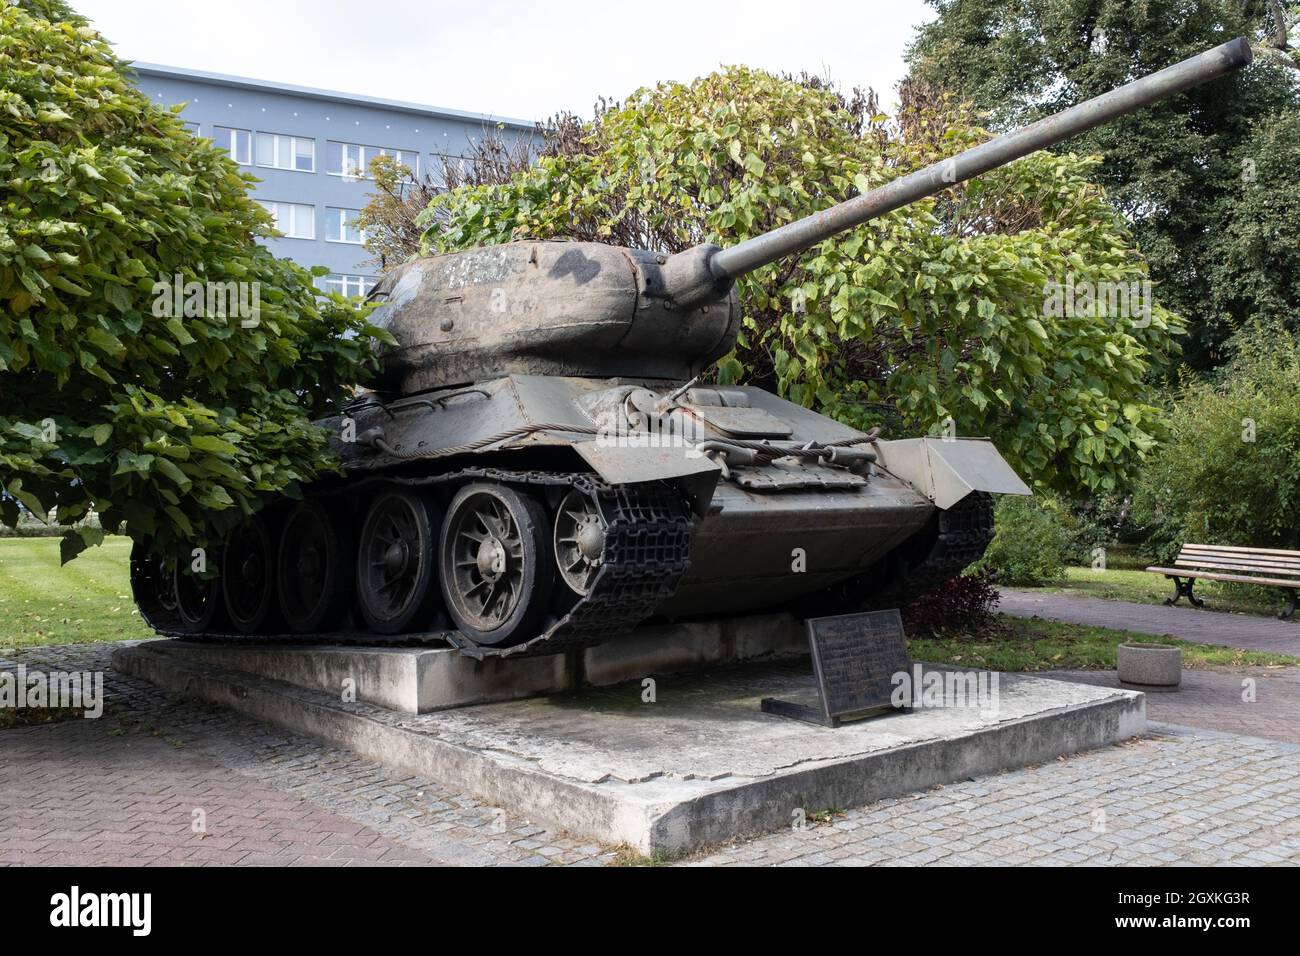 Gliwice, Poland - September 24, 2021. This Soviet T-34 85 tank was part of the Red Army force, which liberated Gliwice in 1945. Many war damages on it Stock Photo